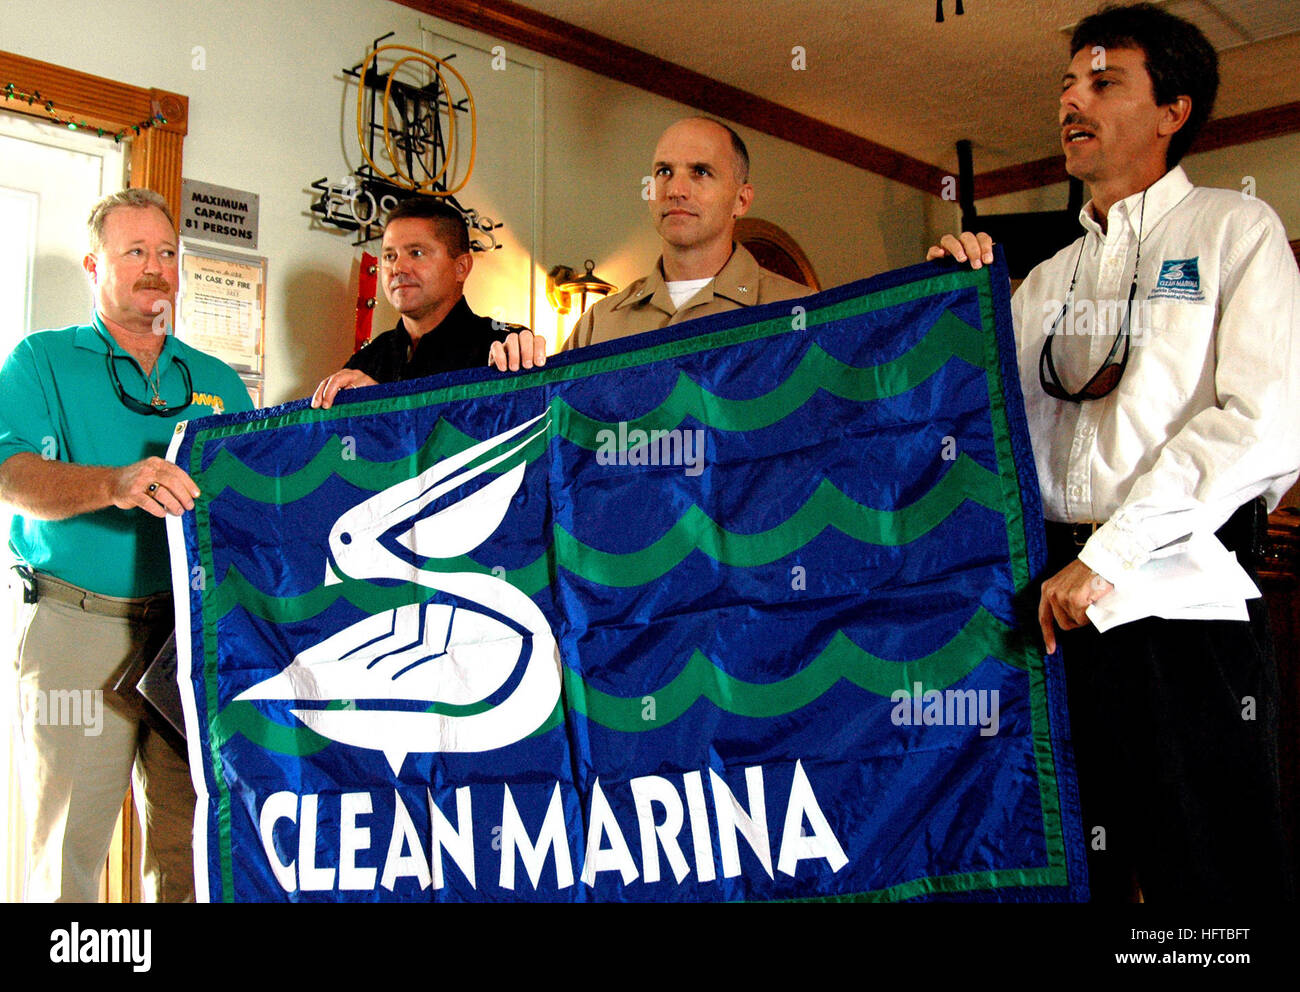 061208-N-5240C-010 Key West, Fla. (Dec. 8, 2006) - Clean Marina Coordinator Edward Russell (right) of the Florida Department of Environmental Protection (DEP) presents the 'clean marina' flag to Naval Air Station Key West Executive Officer Cmdr. Hans P. Liske, Command Master Chief Kraig Holubar and Marina Manager Billy Adkins during a ceremony held at the air station. The designation, which recognizes marina facilities for sound environmental stewardship, marked the fifth consecutive year that NAS Key West has met DEP criteria for a clean marina despite sustaining heavy damage as a result of H Stock Photo